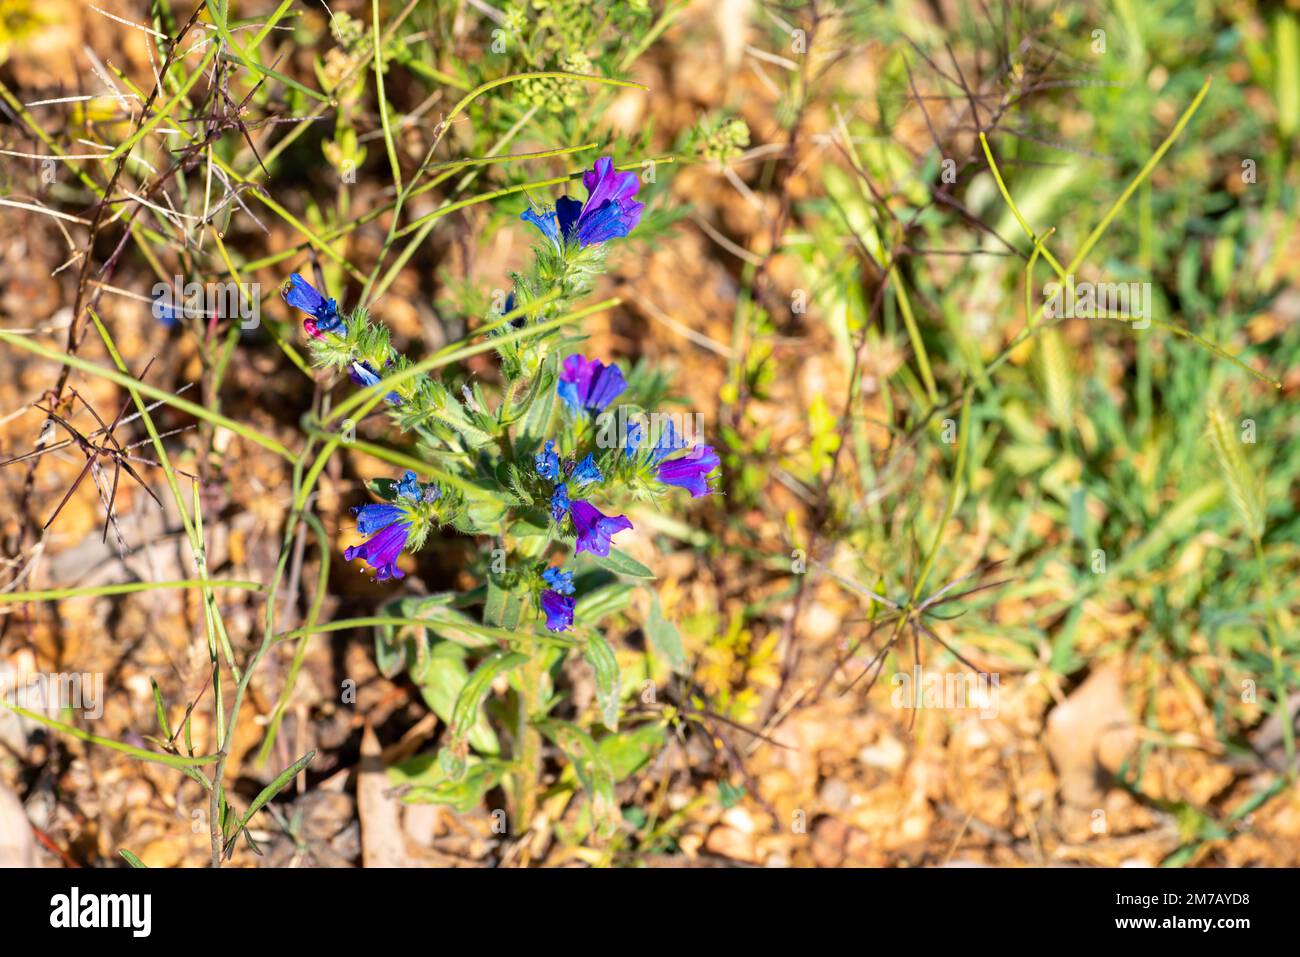 Echium plantagineum, commonly known as purple viper's-bugloss or Patterson's curse, growing in a paddock near Bourke, New South Wales, Australia Stock Photo